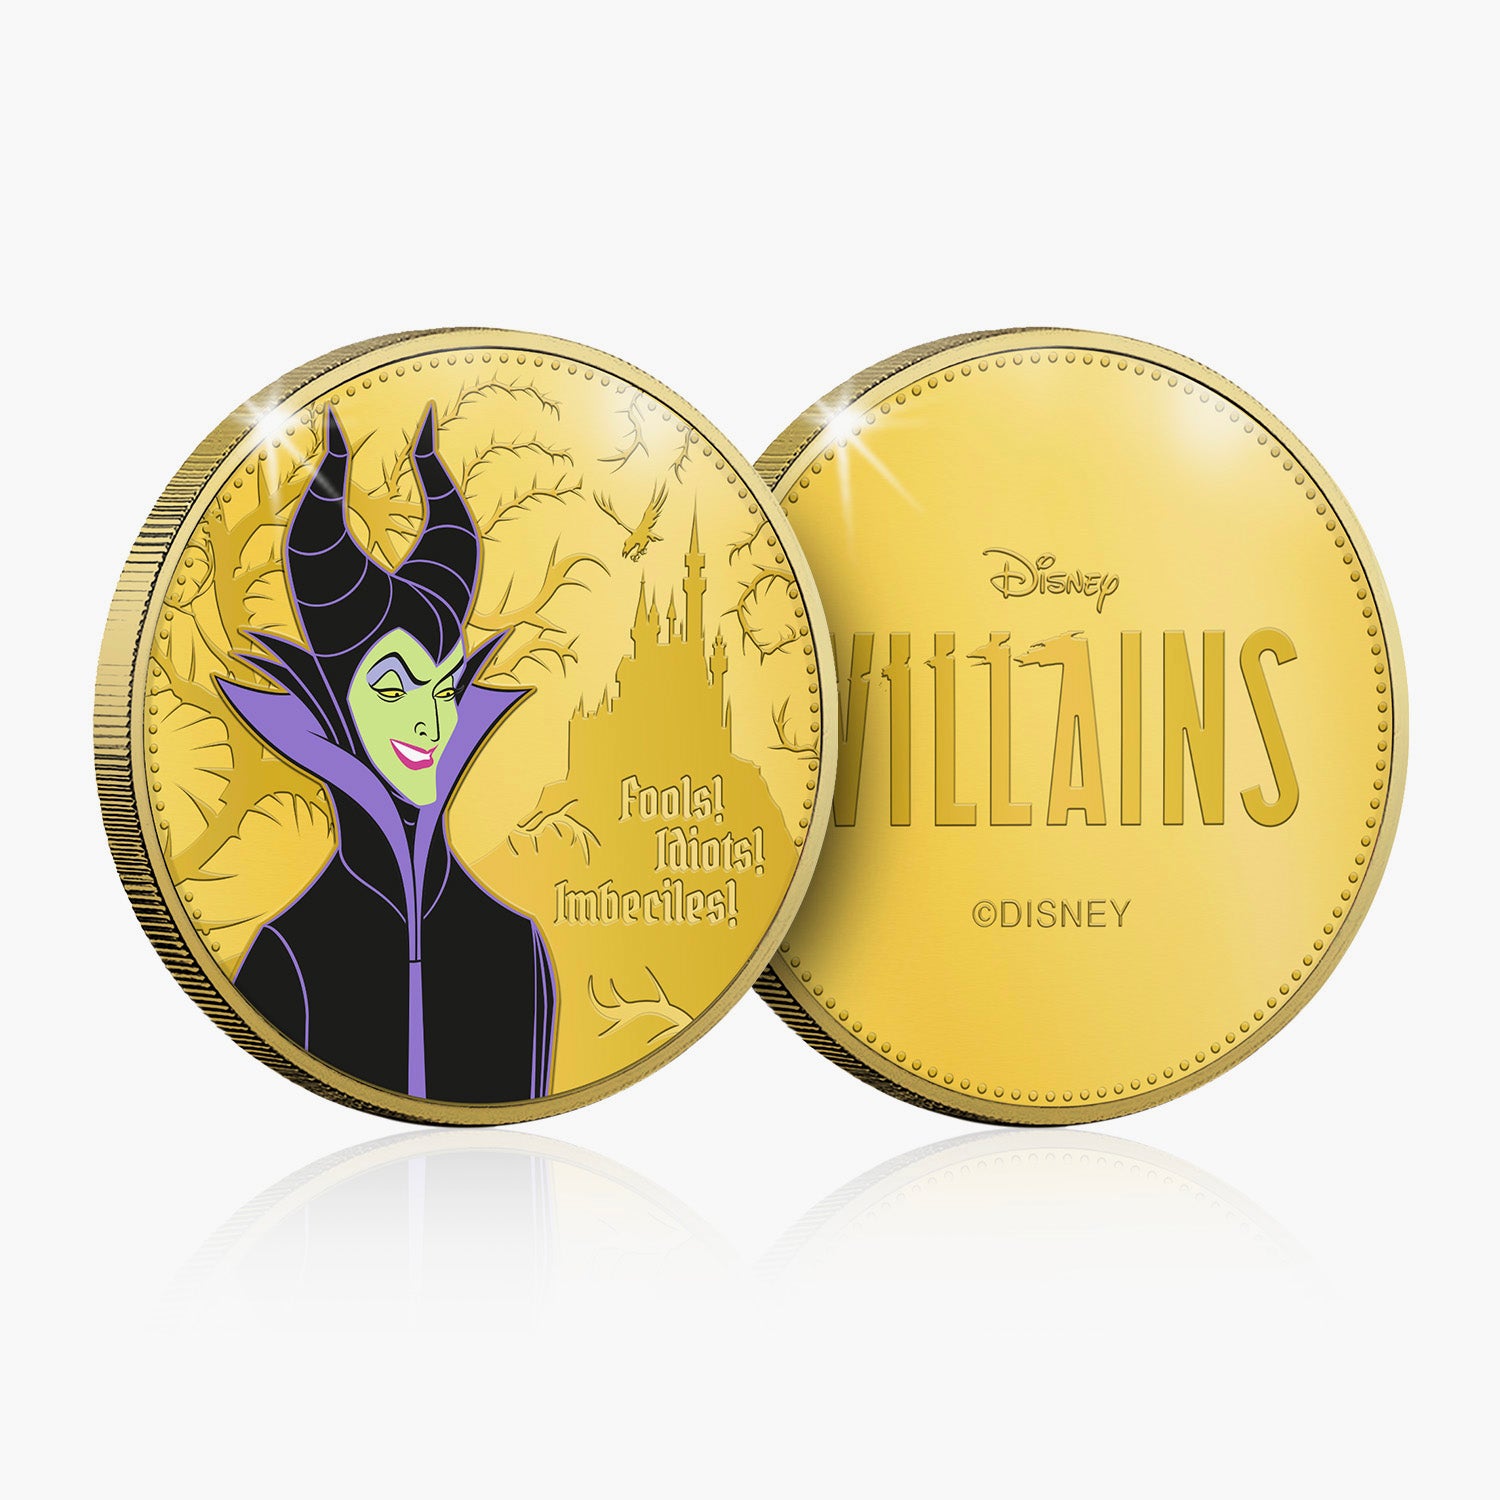 Maleficent Gold-Plated Commemorative